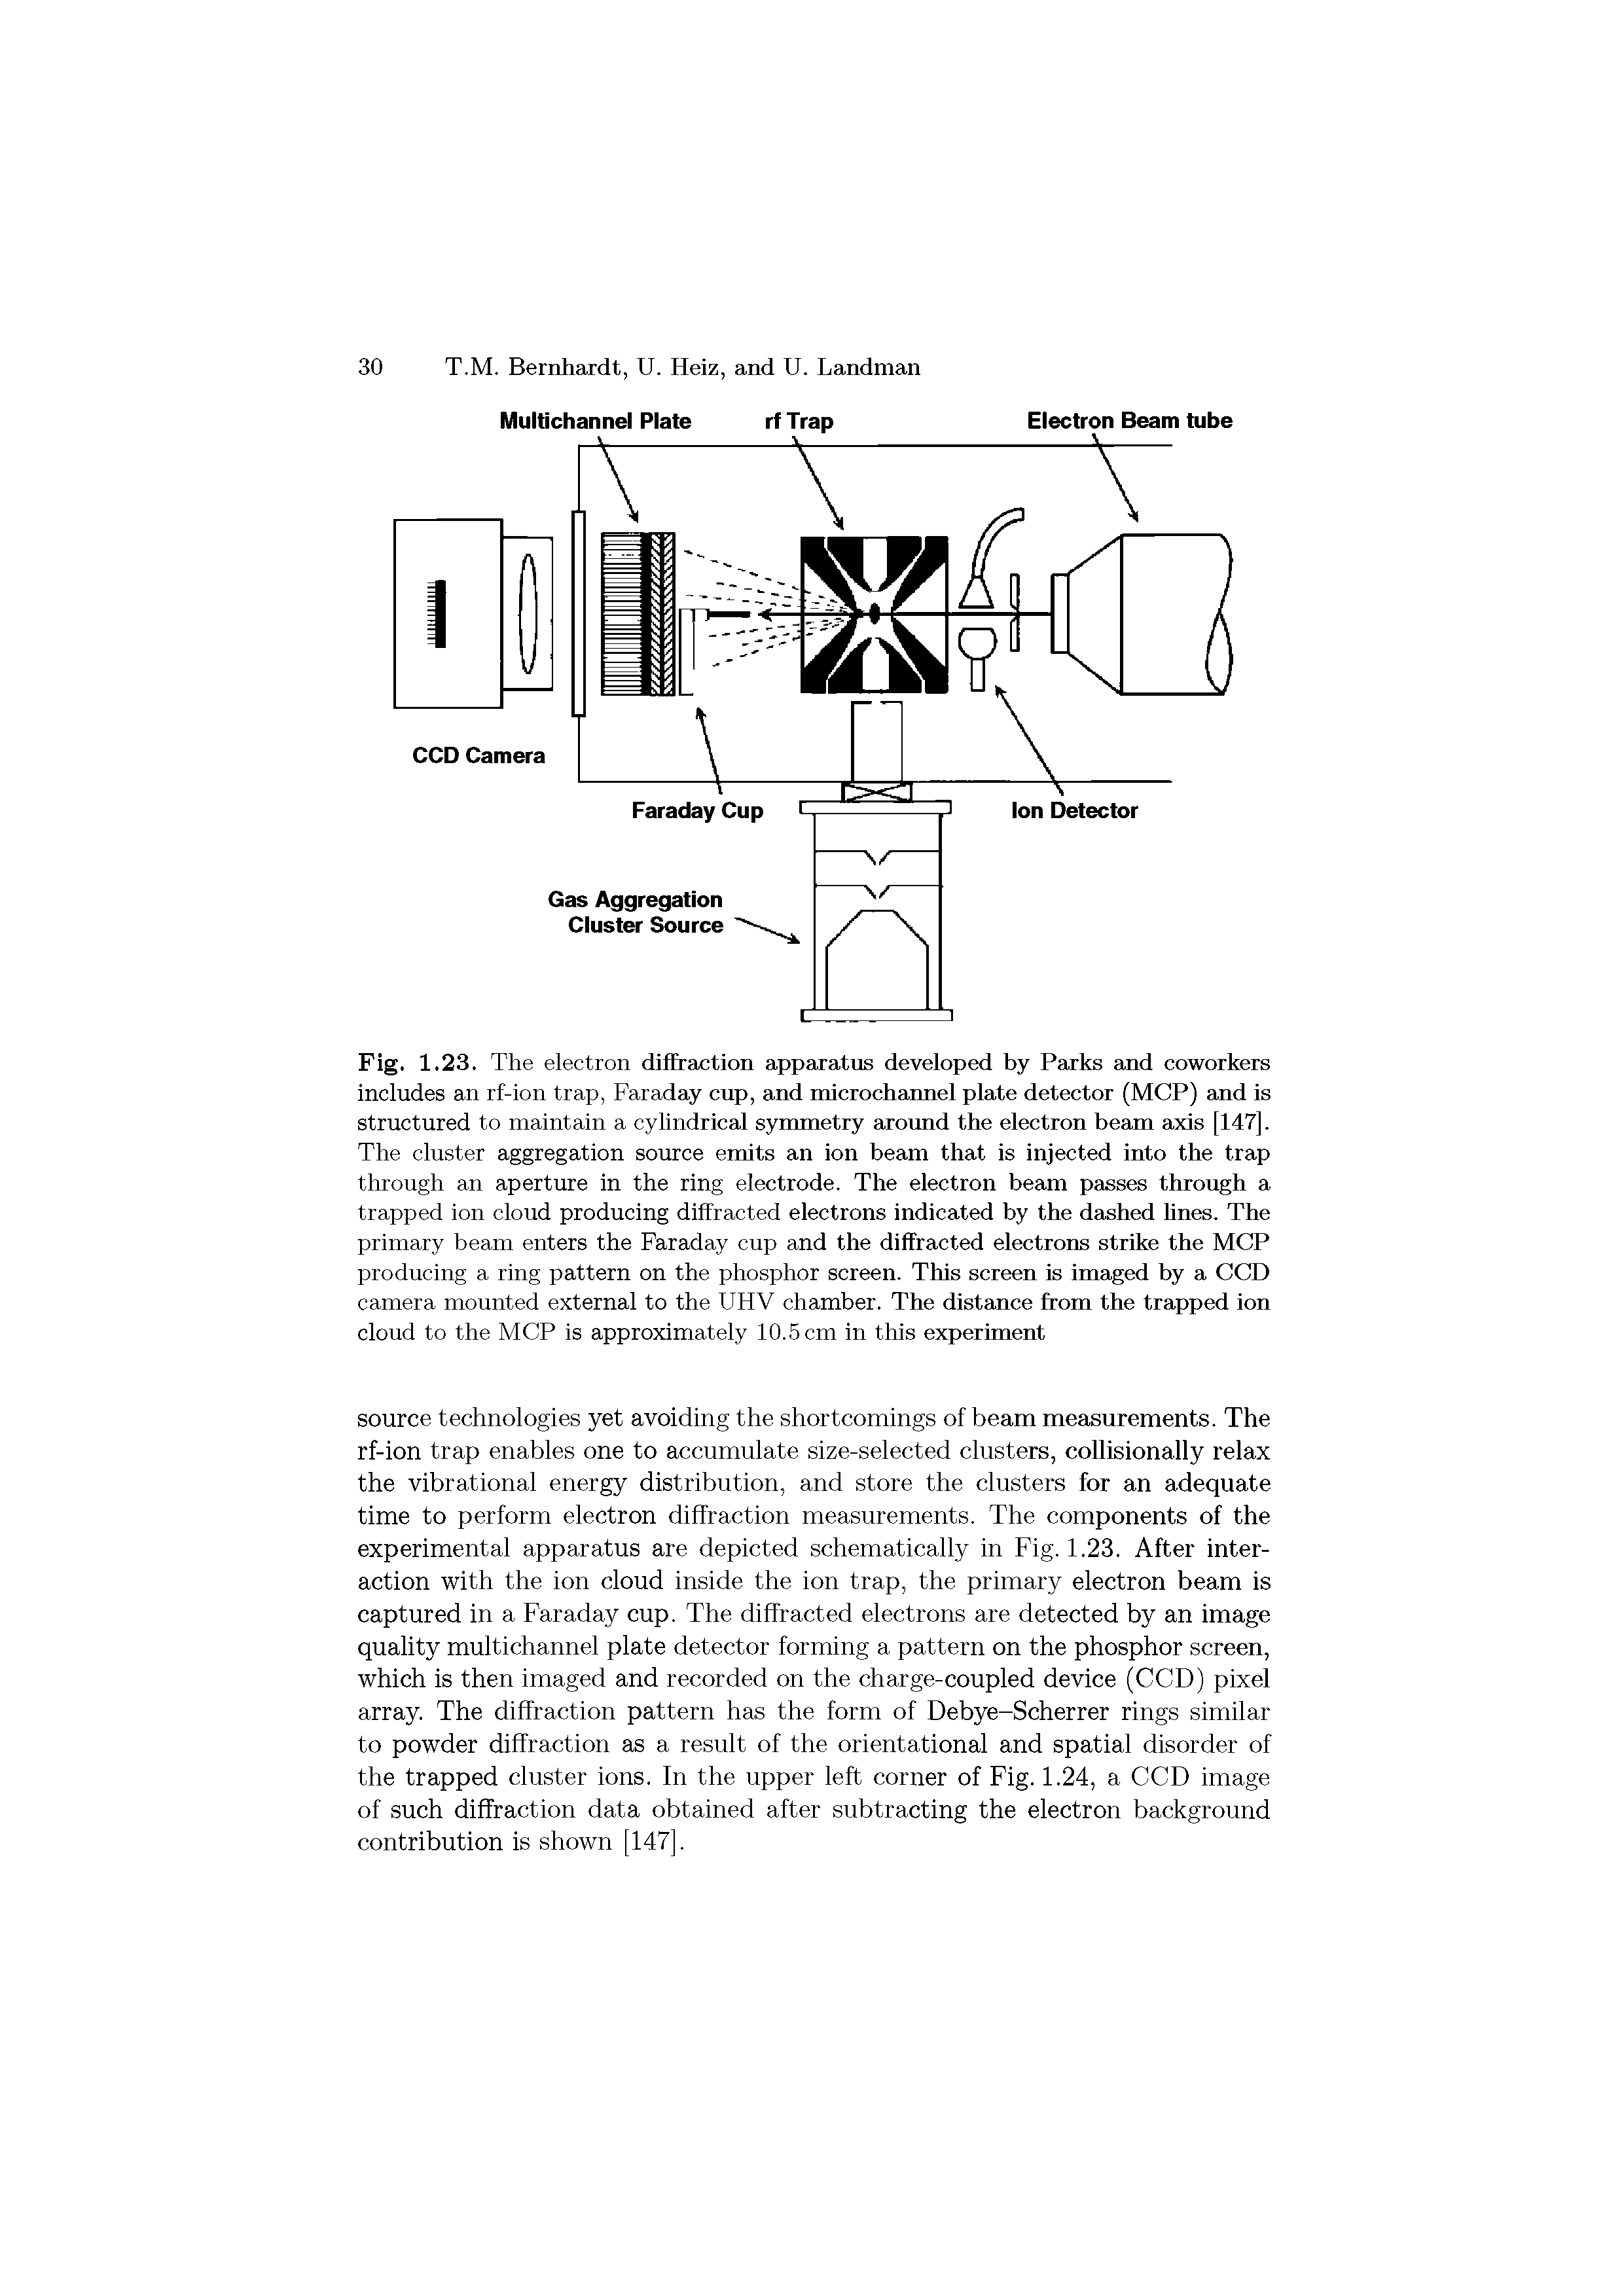 Fig. 1.23. The electron diffraction apparatus developed by Parks and coworkers includes an rf-ion trap, Faraday cup, and microchaimel plate detector (MCP) and is structured to maintain a cylindrical symmetry around the electron beam axis [147]. The cluster aggregation source emits an ion beam that is injected into the trap through an aperture in the ring electrode. The electron beam passes through a trapped ion cloud producing diffracted electrons indicated by the dashed hues. The primary beam enters the Faraday cup and the diffracted electrons strike the MCP producing a ring pattern on the phosphor screen. This screen is imaged by a CCD camera mounted external to the UHV chamber. The distance from the trapped ion cloud to the MCP is approximately 10.5 cm in this experiment...